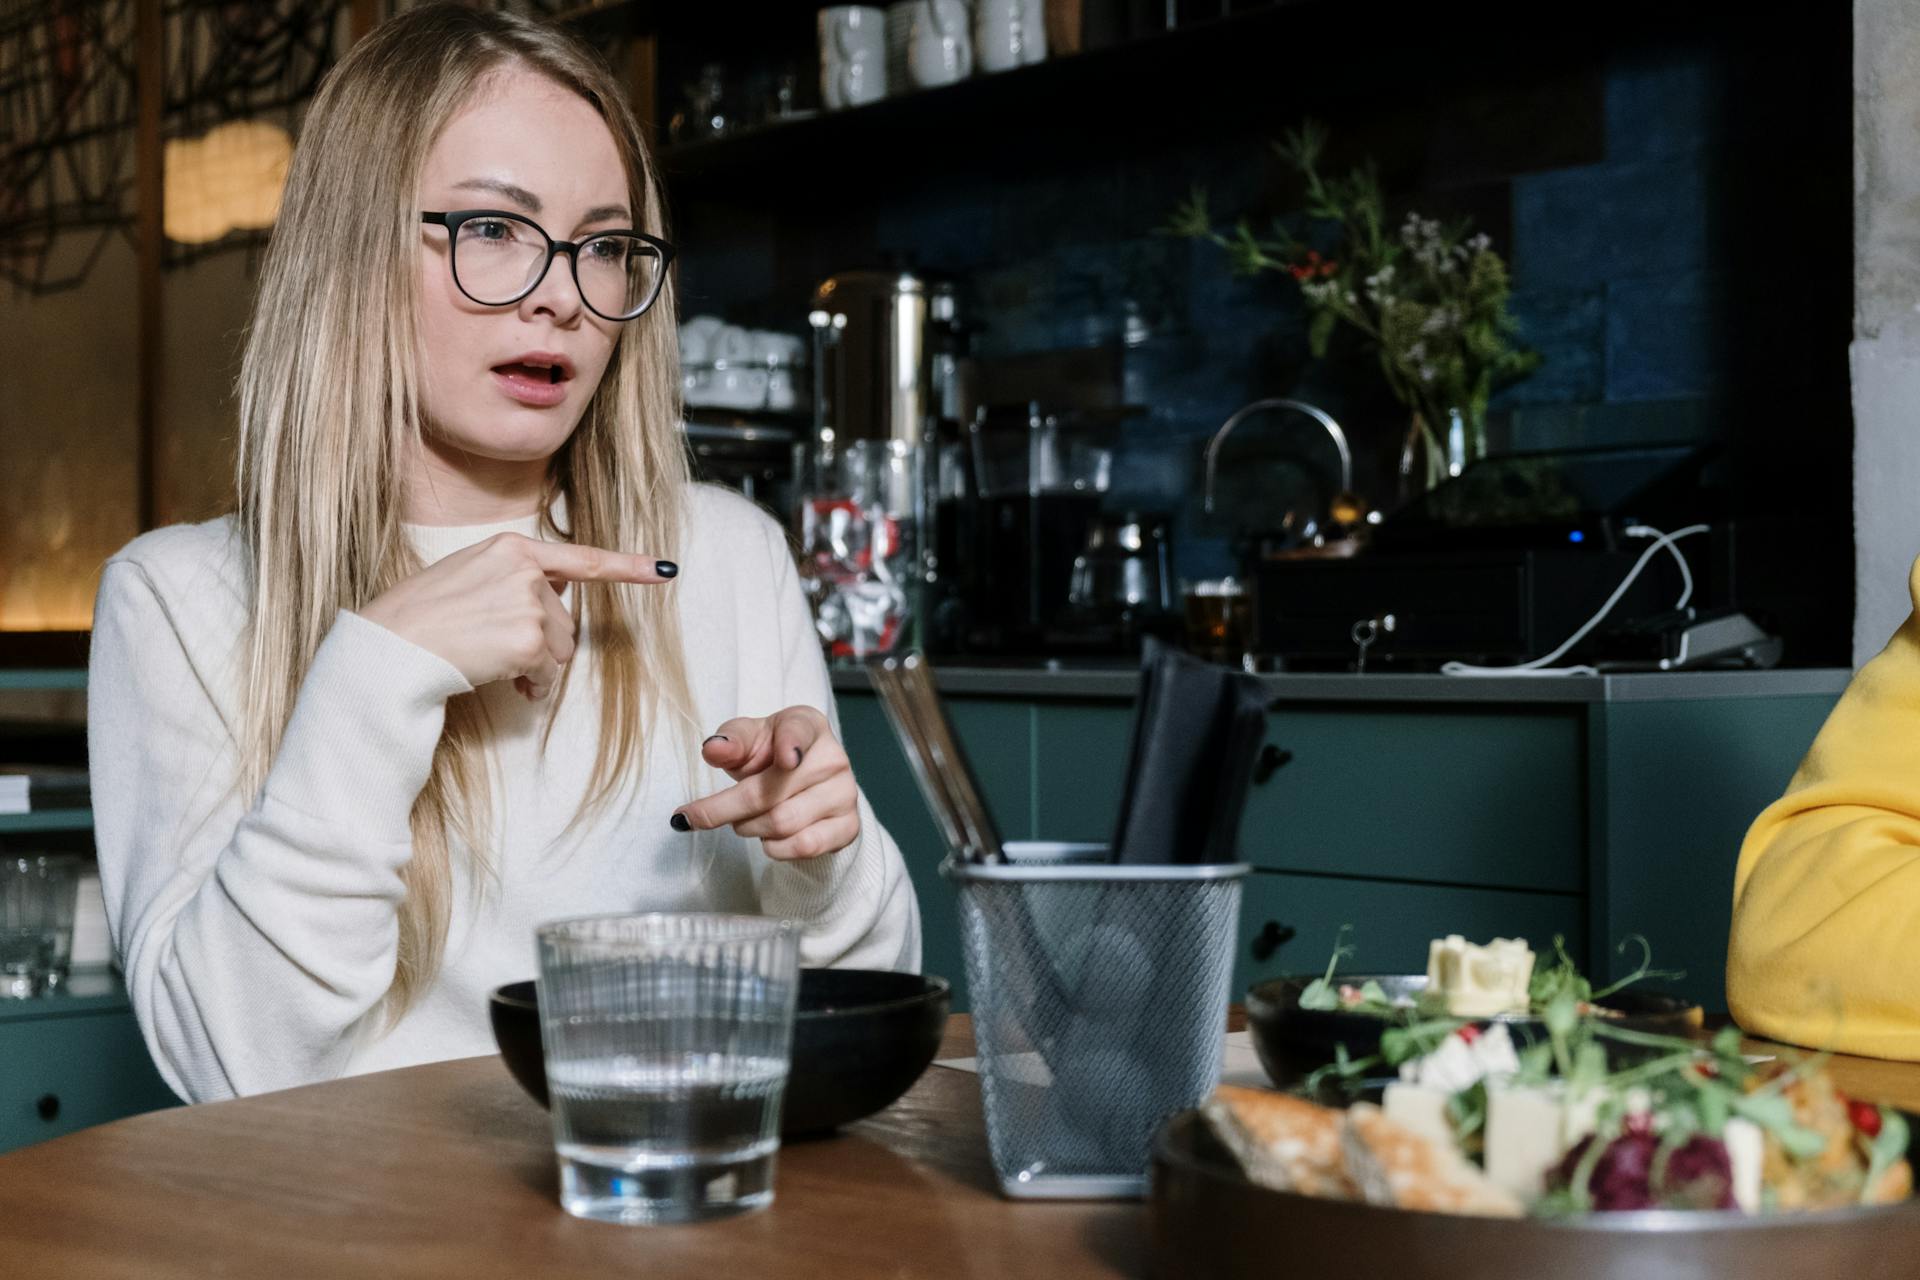 A woman warning someone at the restaurant | Source: Pexels